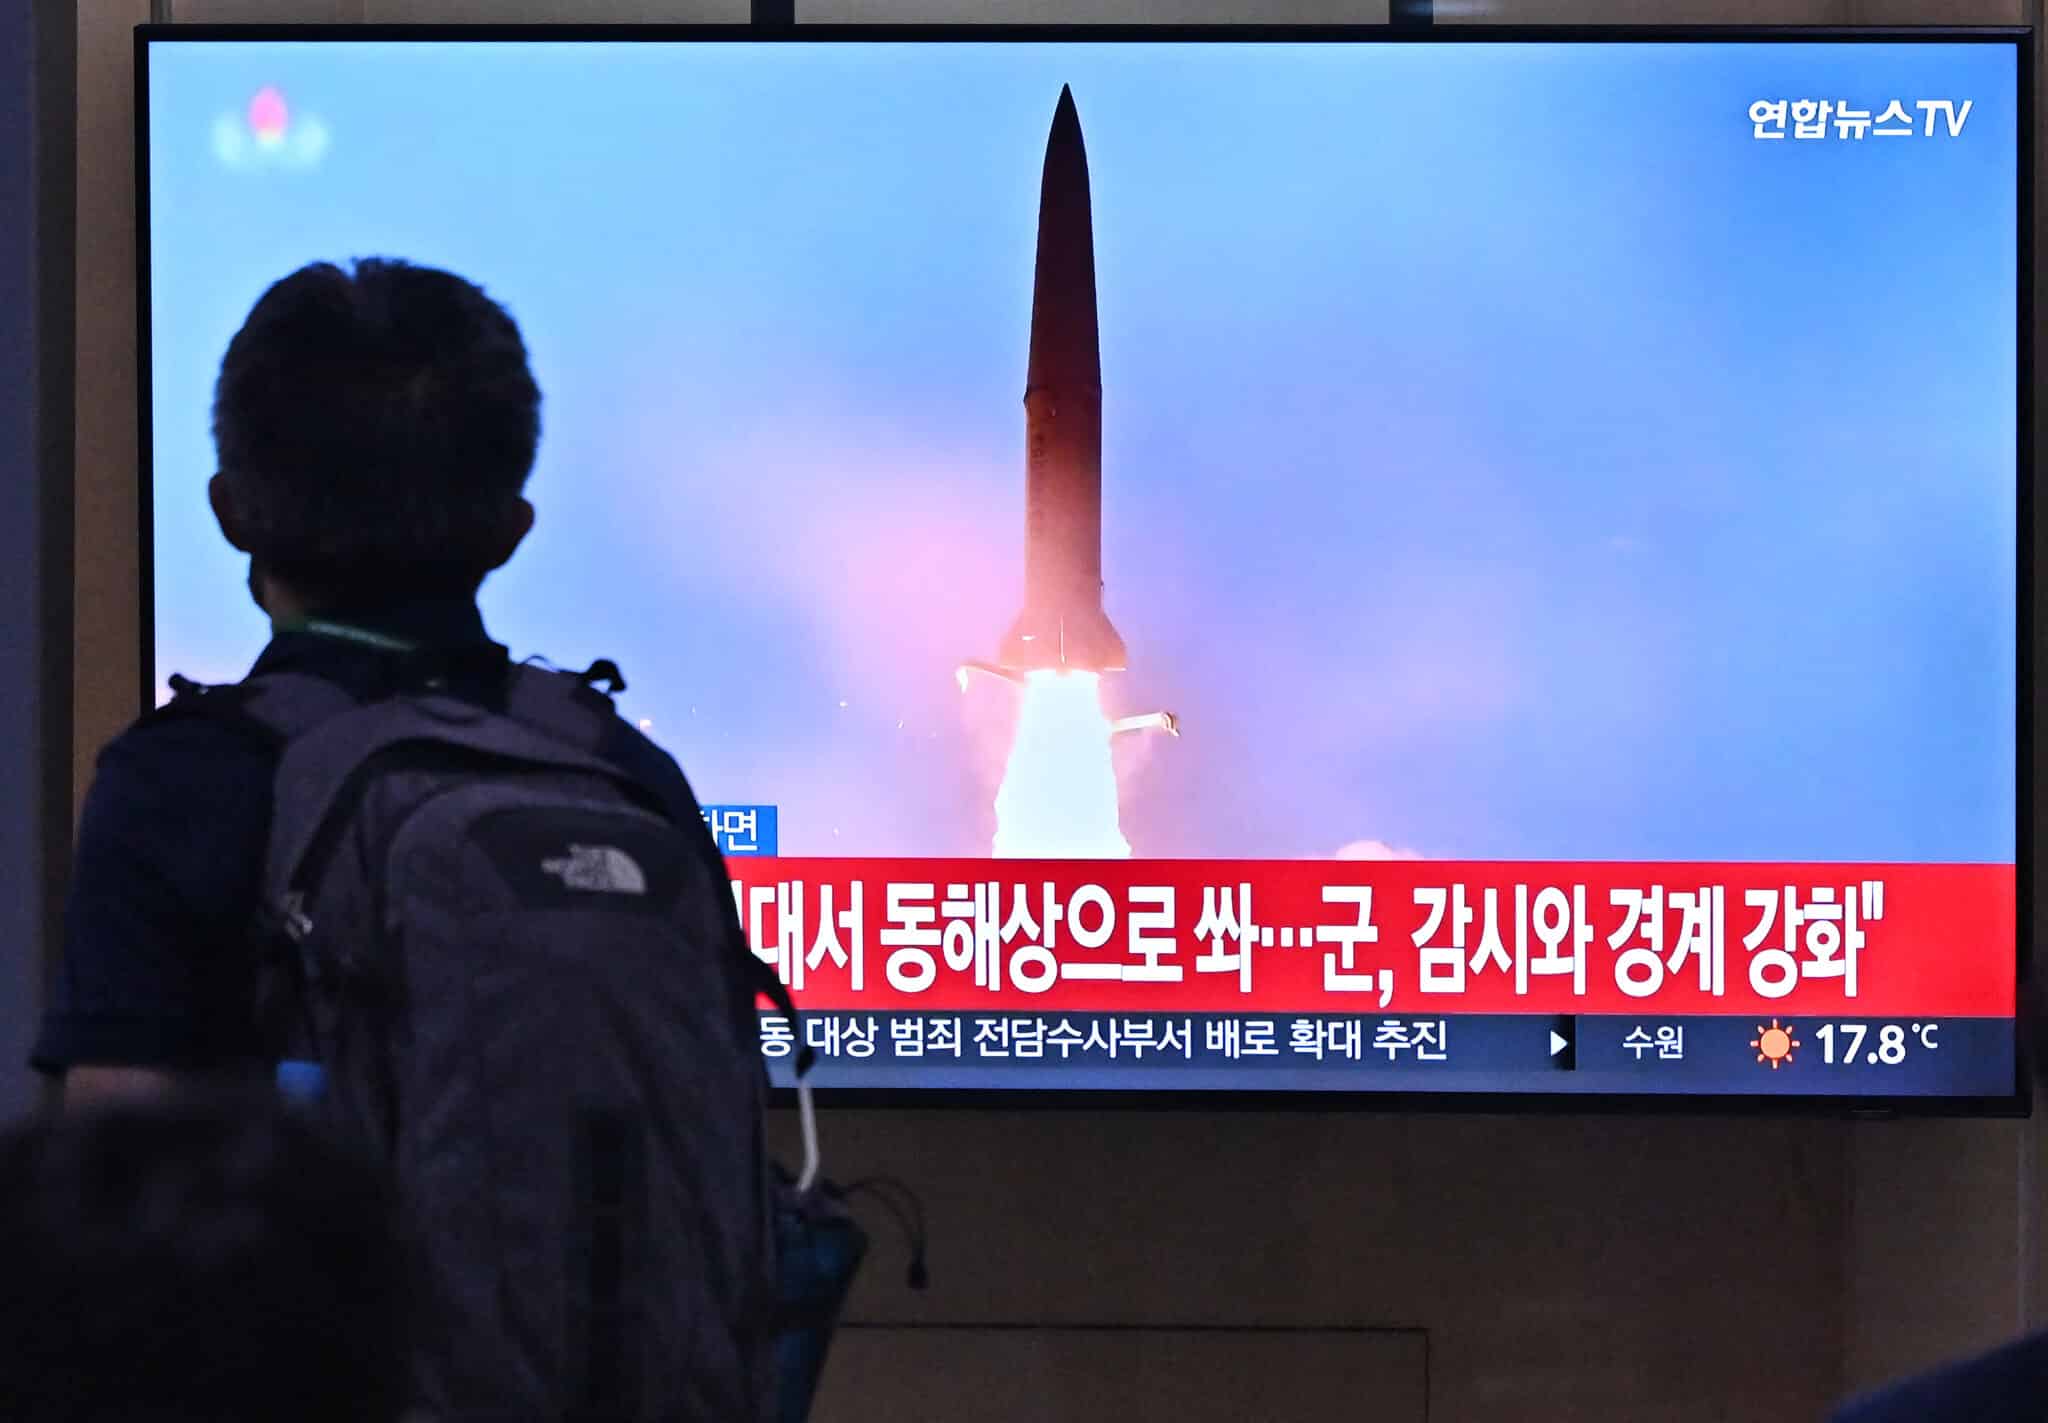 A man walks past a television screen showing a news broadcast with file footage of a North Korean missile test, at a railway station in Seoul on September 29, 2022. - North Korea fired two ballistic missiles on September 29, just hours after US Vice President Kamala Harris left South Korea, where she had toured the heavily-fortified Demilitarized Zone which divides the peninsula. (Photo by Jung Yeon-je / AFP) (Photo by JUNG YEON-JE/AFP via Getty Images)